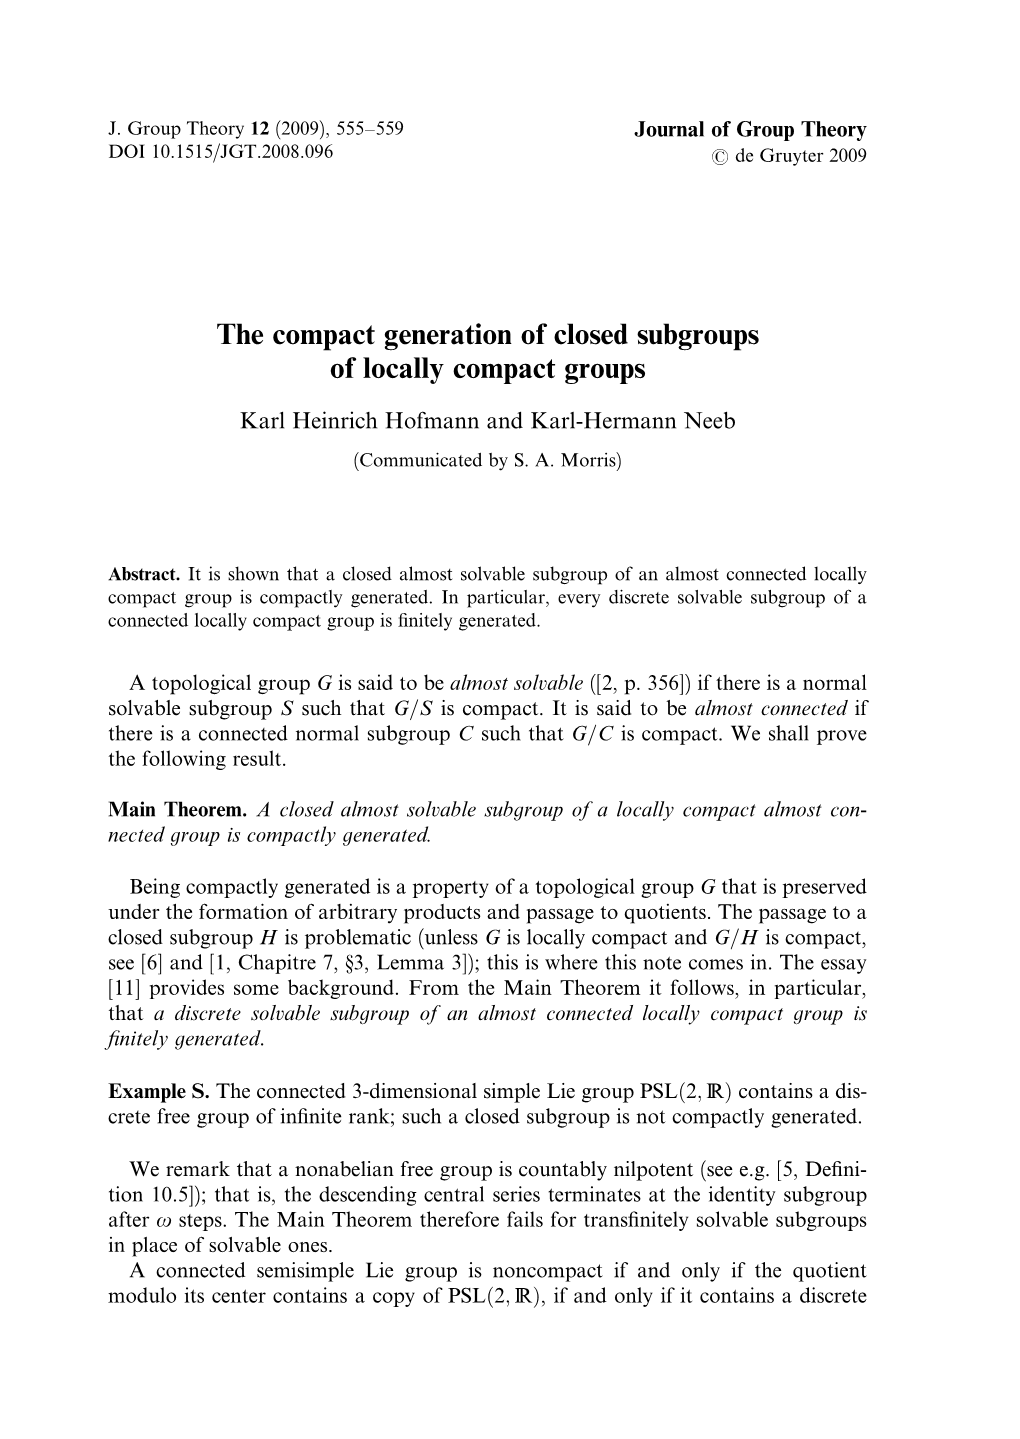 The Compact Generation of Closed Subgroups of Locally Compact Groups